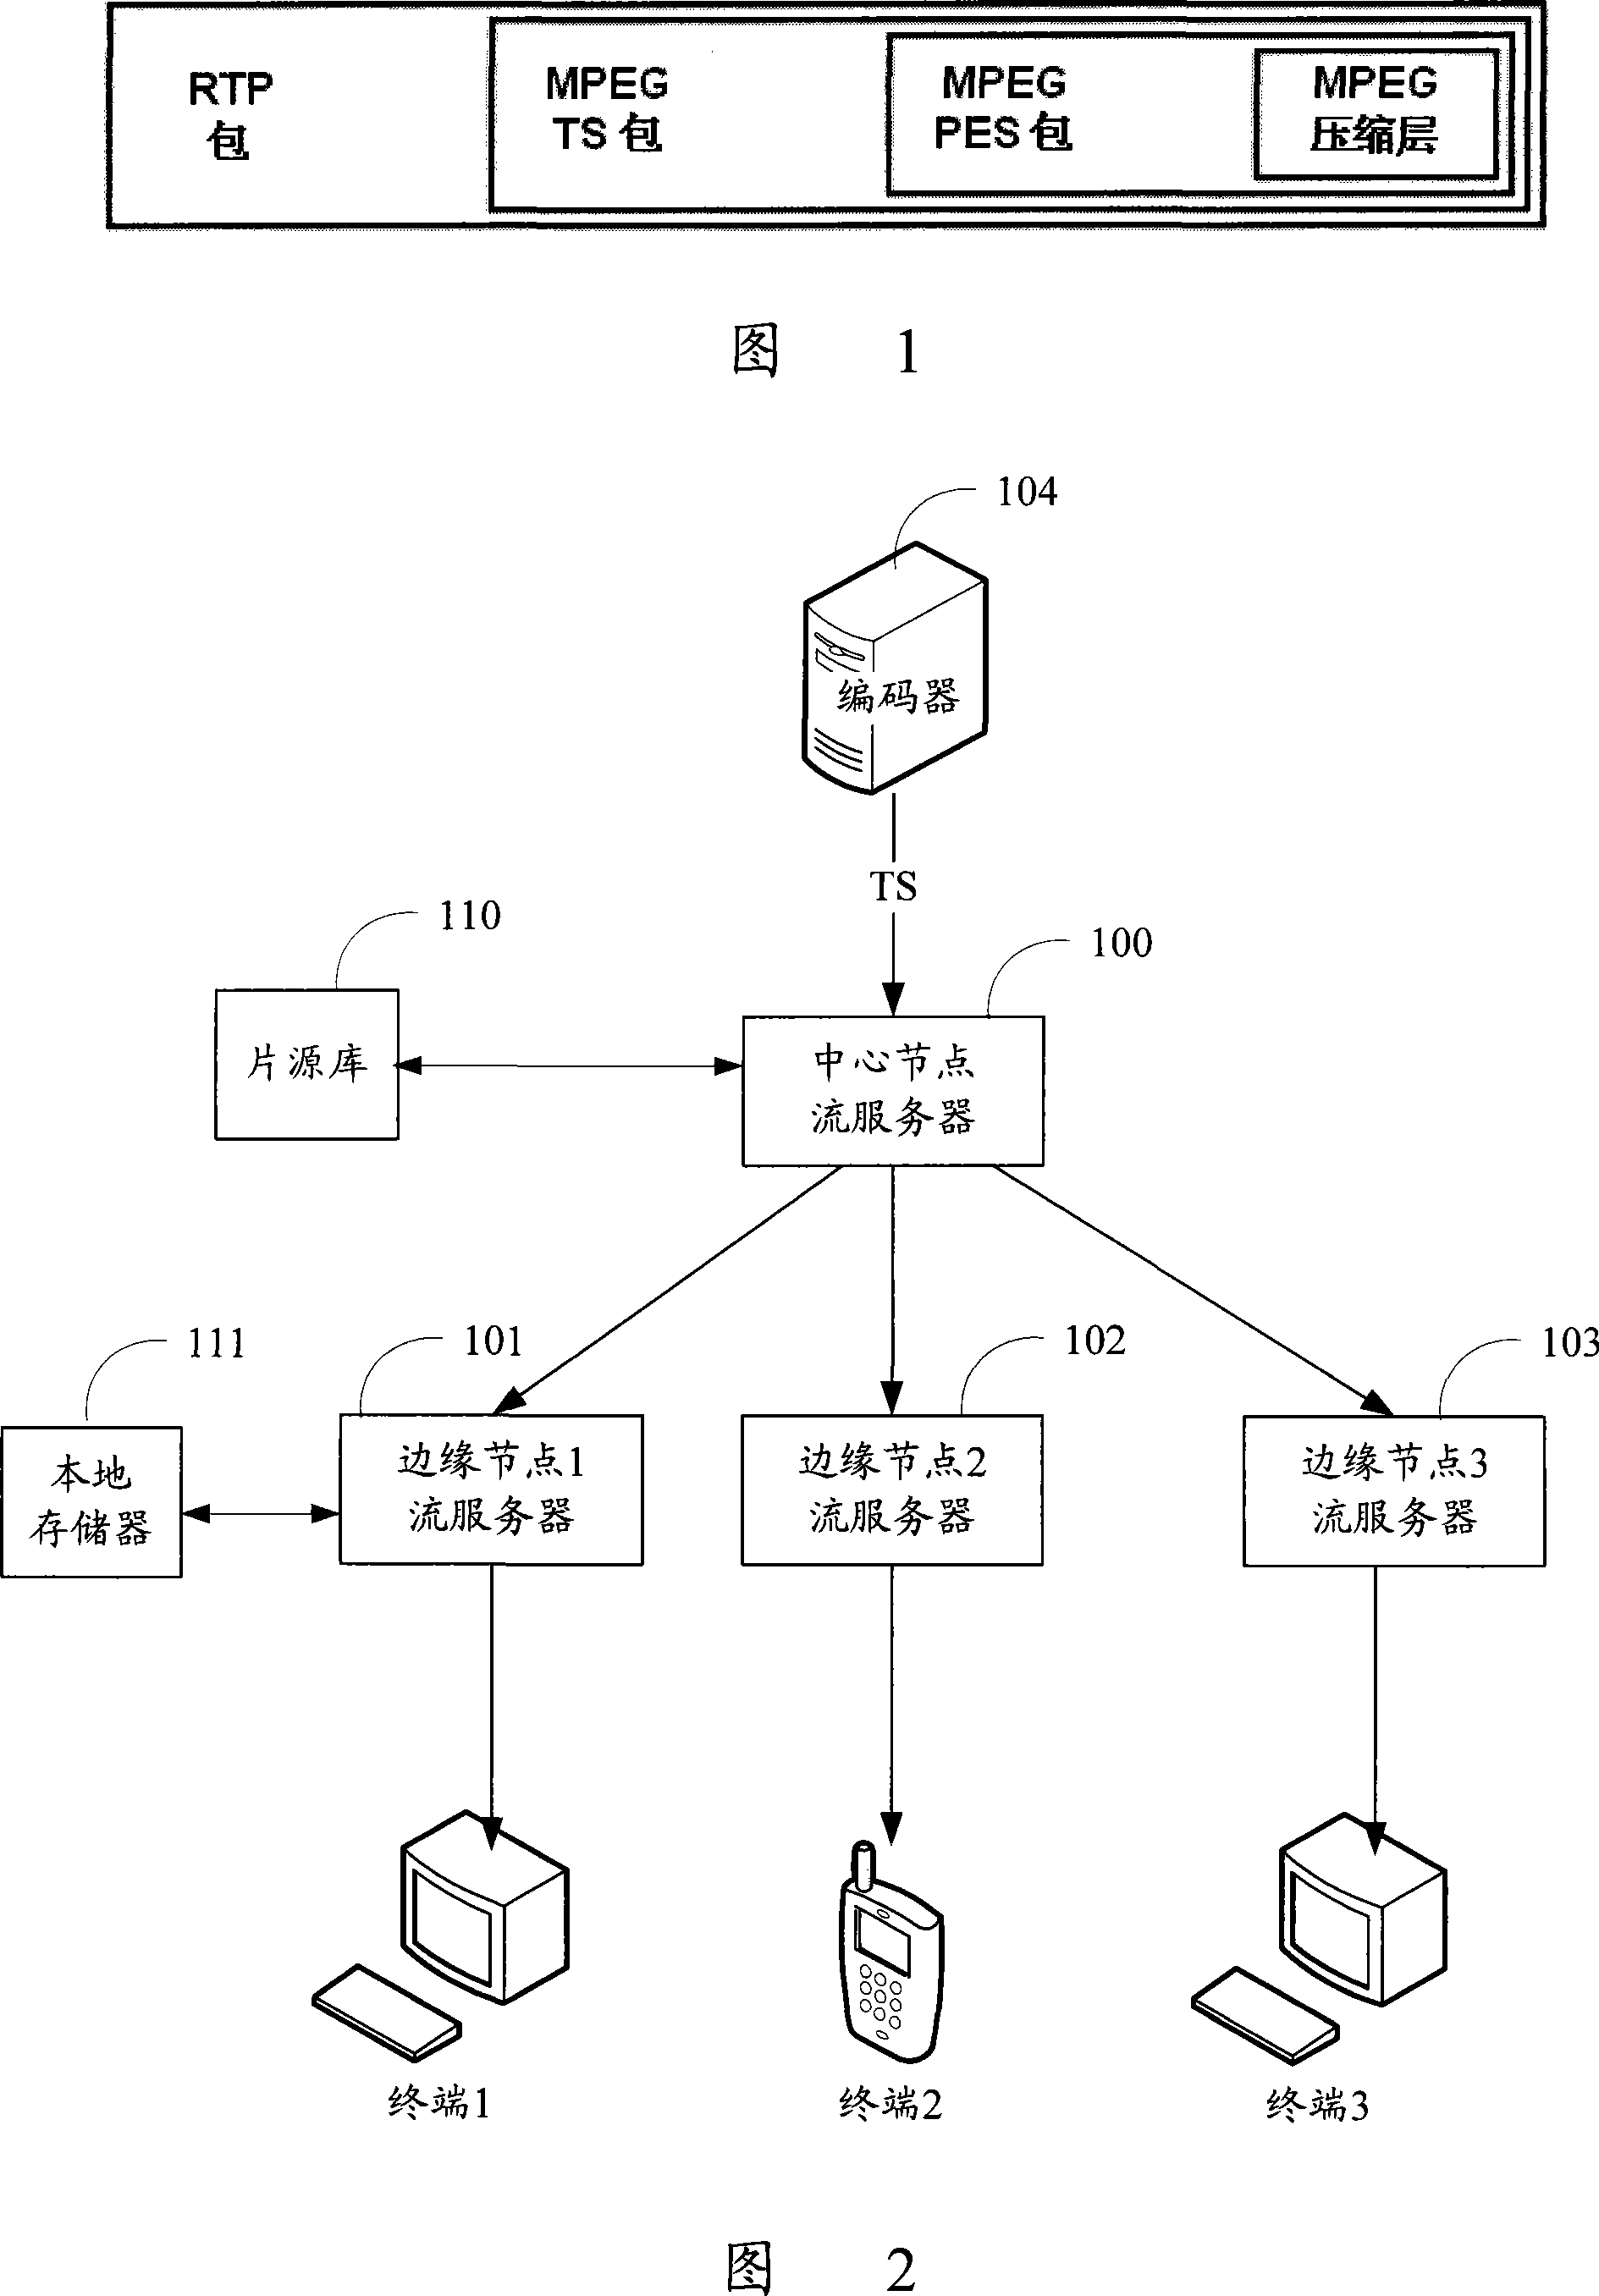 Transmission processing method for MPEG conveying stream in video-on-demand service